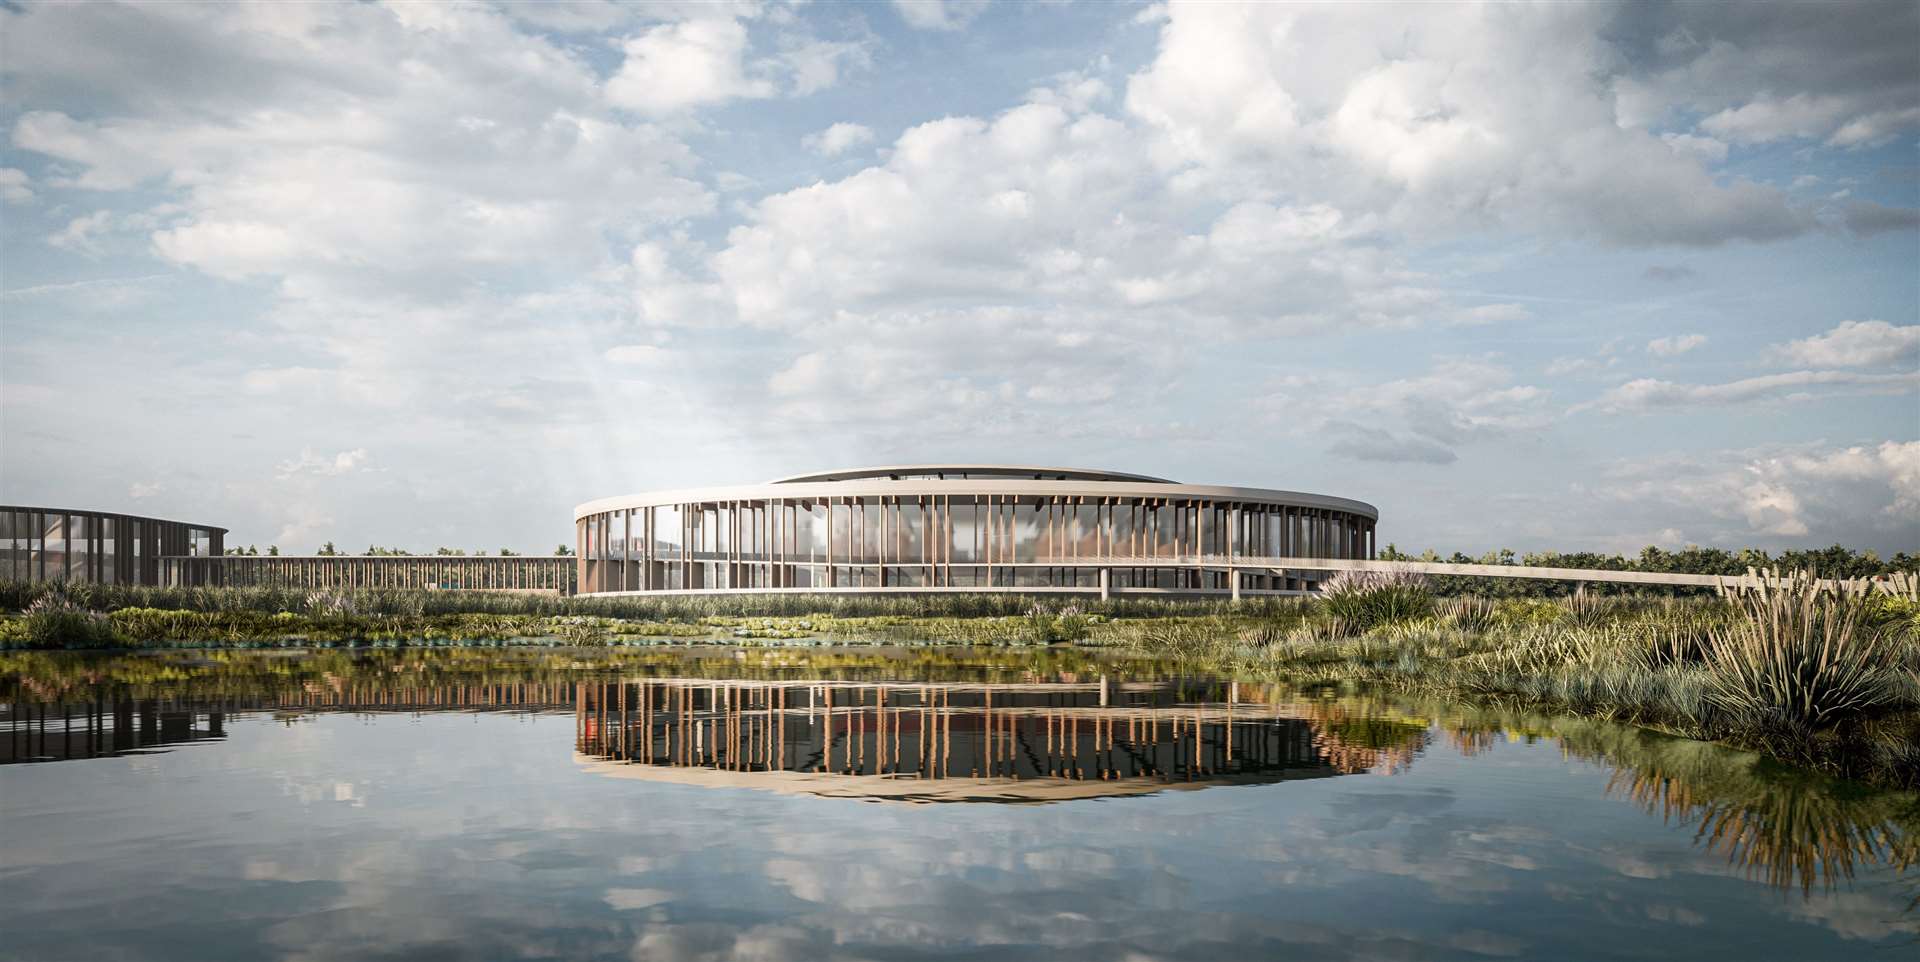 The Brompton factory is set to be built on stilts above wetlands along the A2042